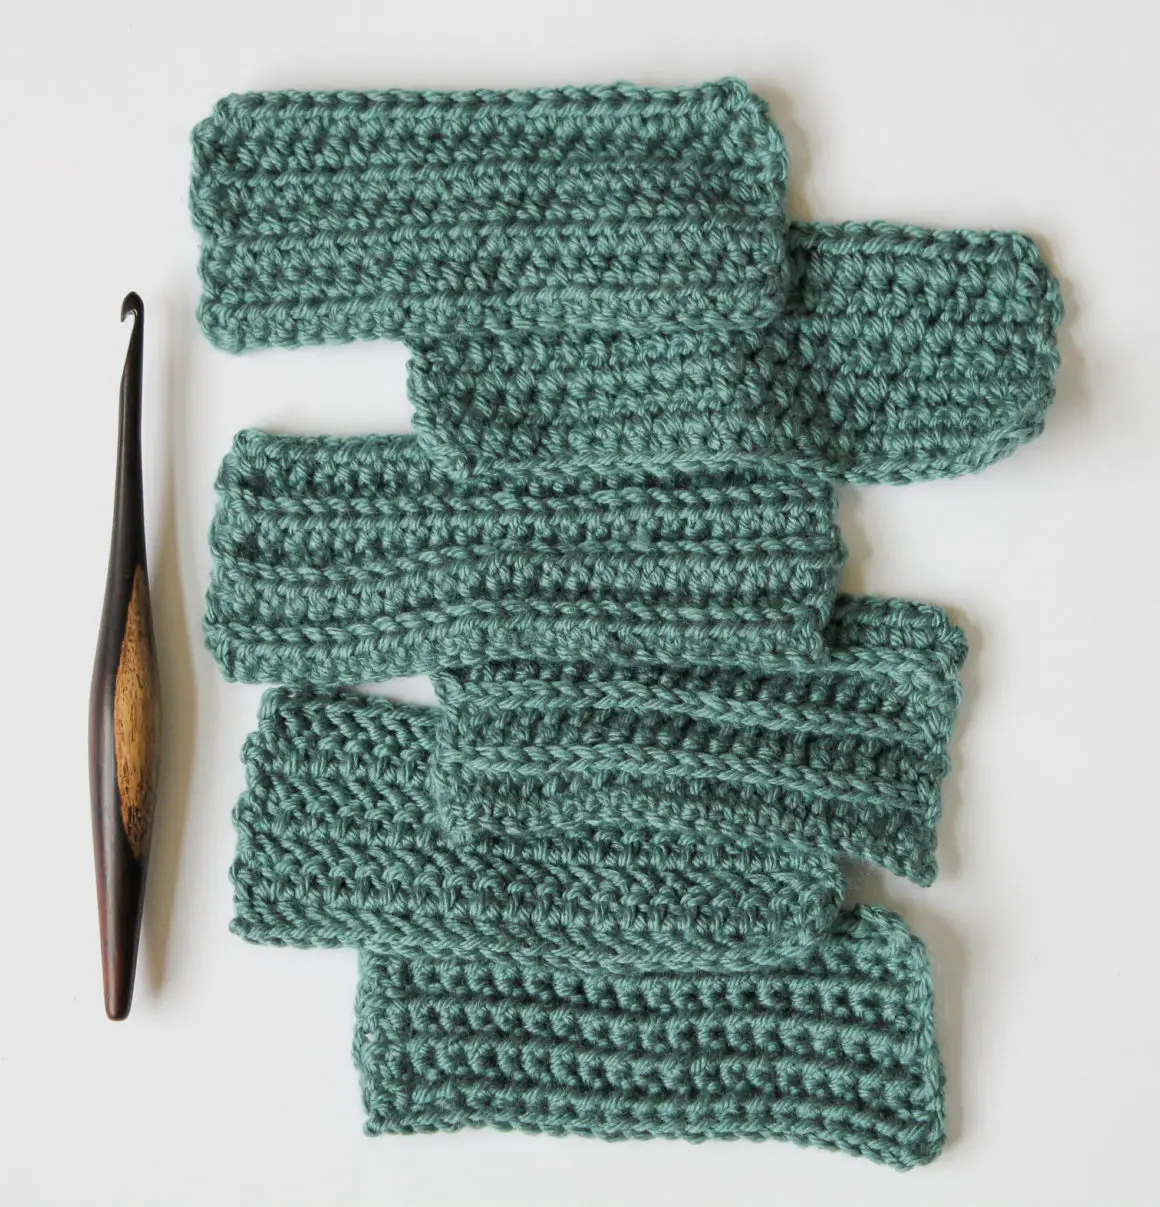 Easy variations of the half double crochet stitch. Photo tutorials for herringbone half double crochet, wide hdc, hdc in 3rd loop, and more. This is part 3 of a 3-part series!